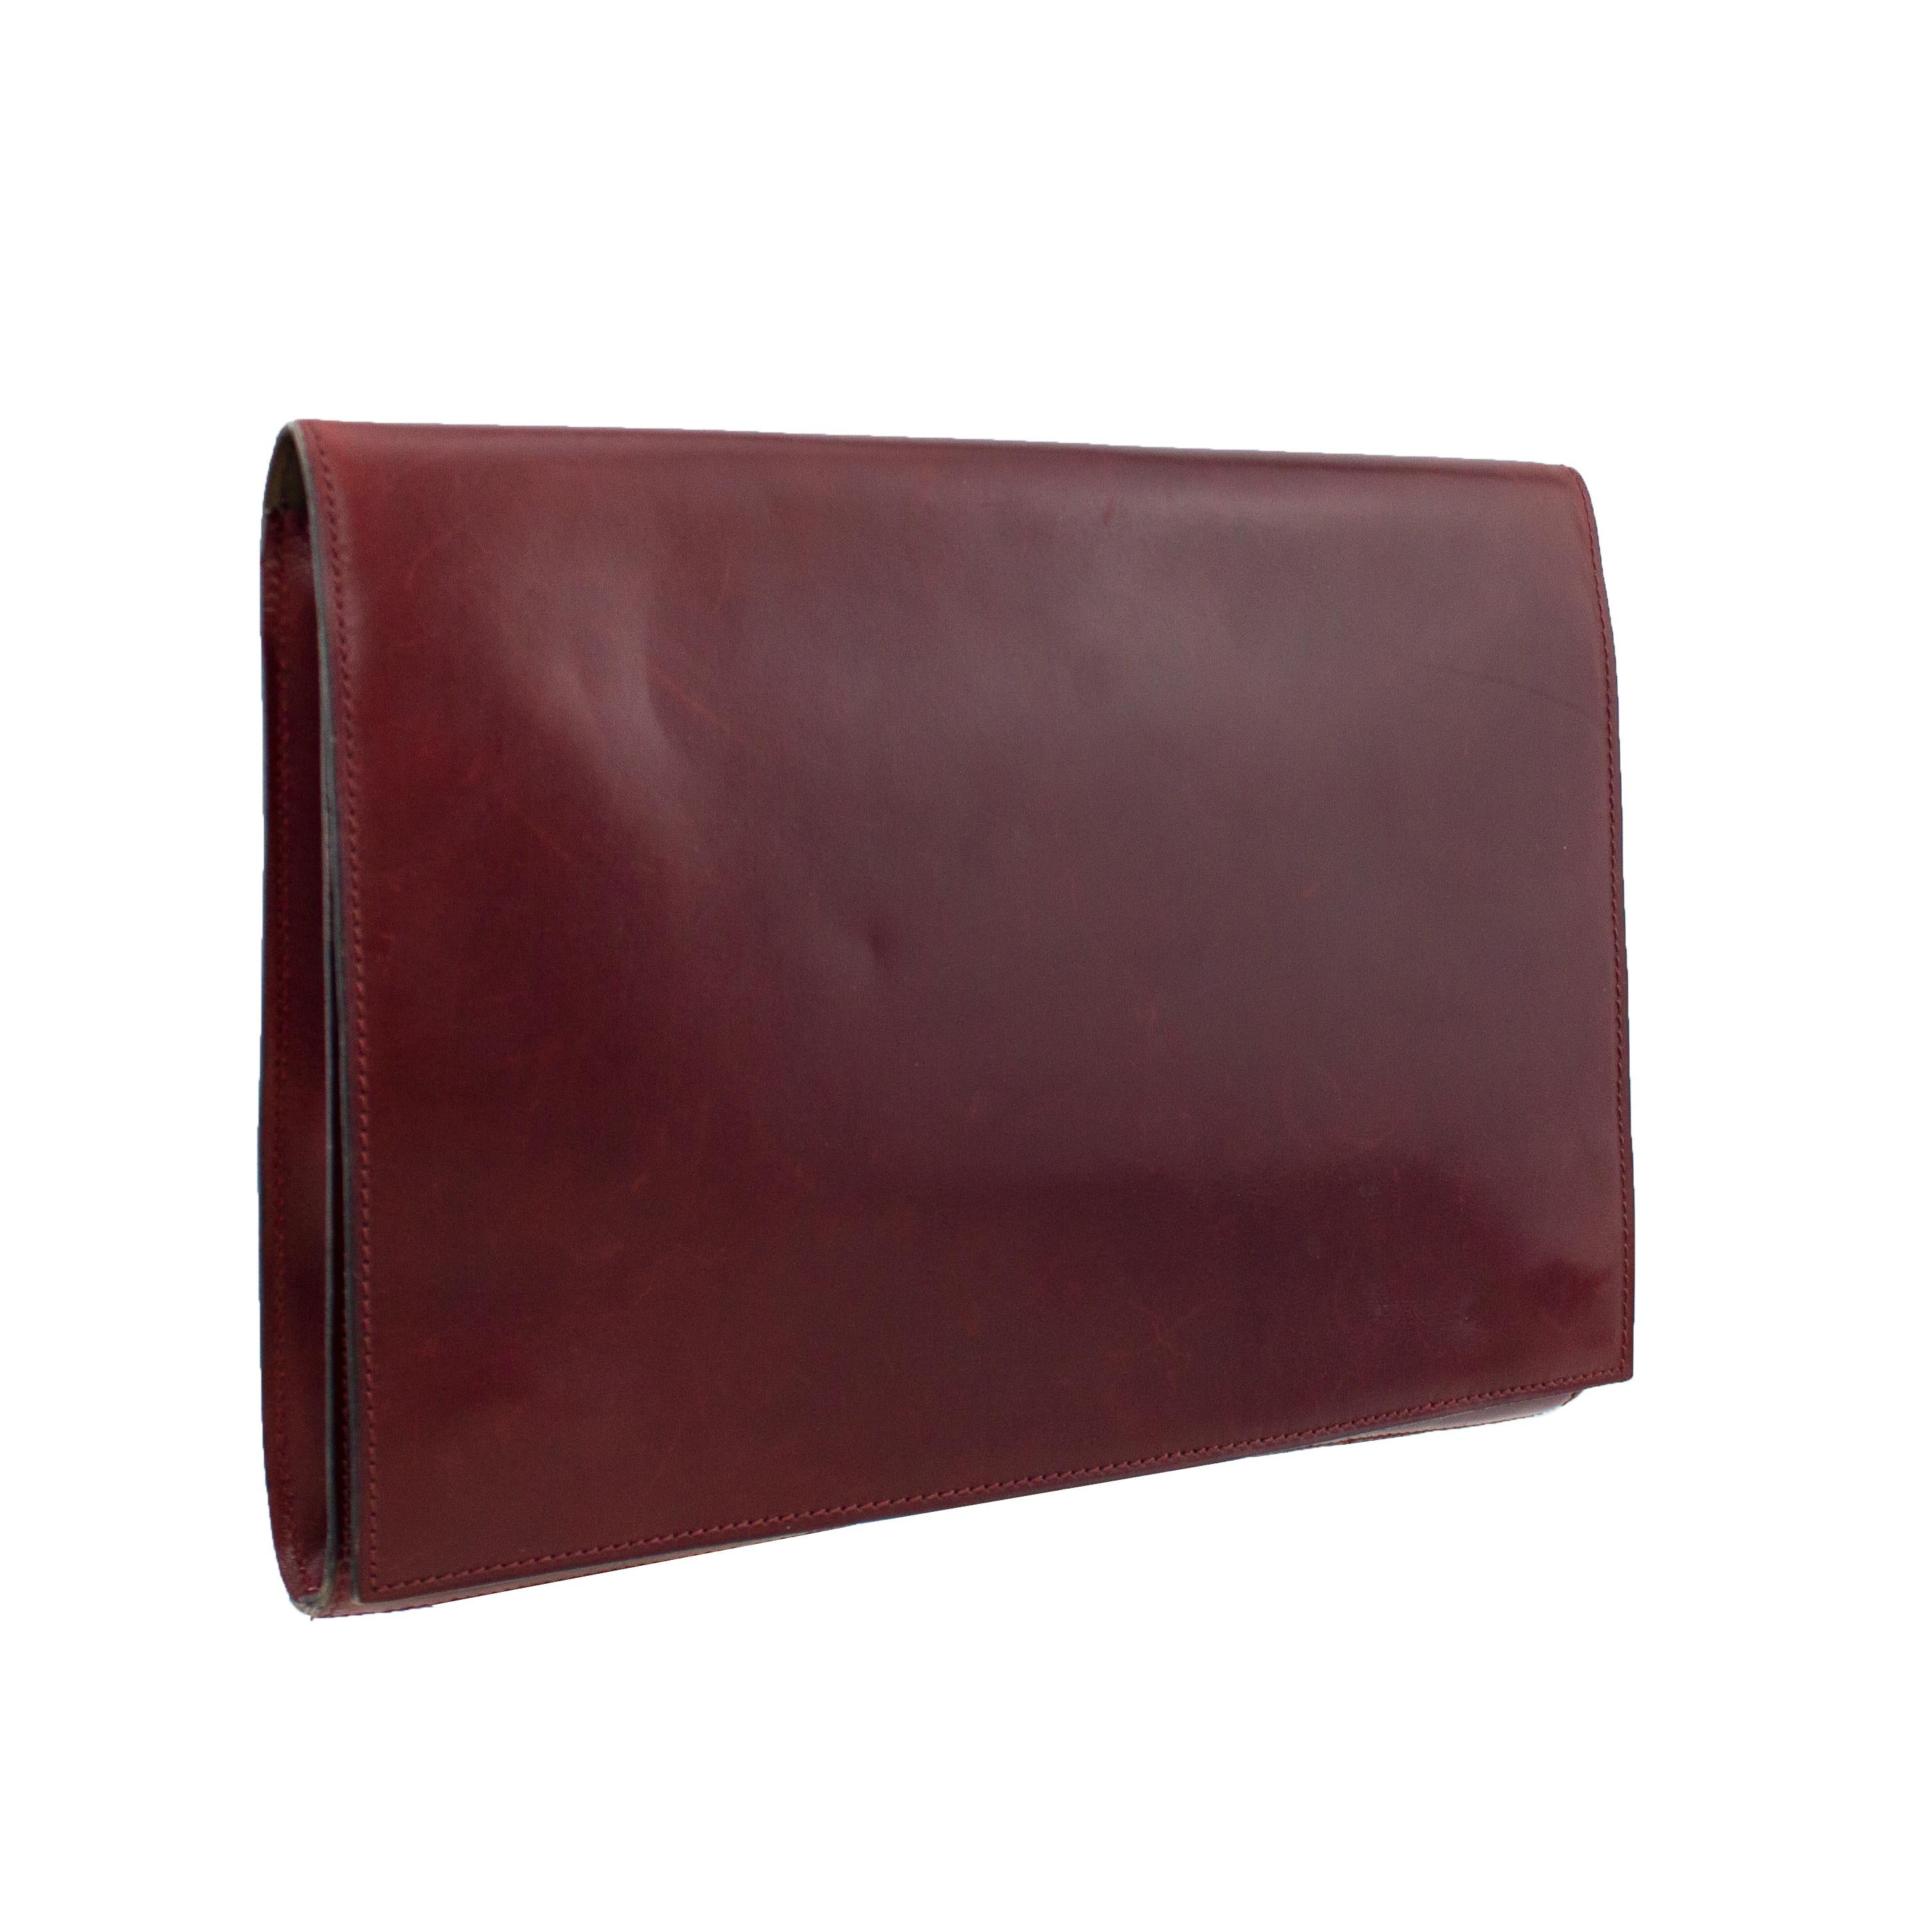 Sleek and chic supple polished maroon leather Alaïa portfolio from the 1990s. Rectangular with a large front flap that closes with two large interior magnetic snaps. Interior of flap is brown suede with gold Alaïa brand stamps. Interior compartment